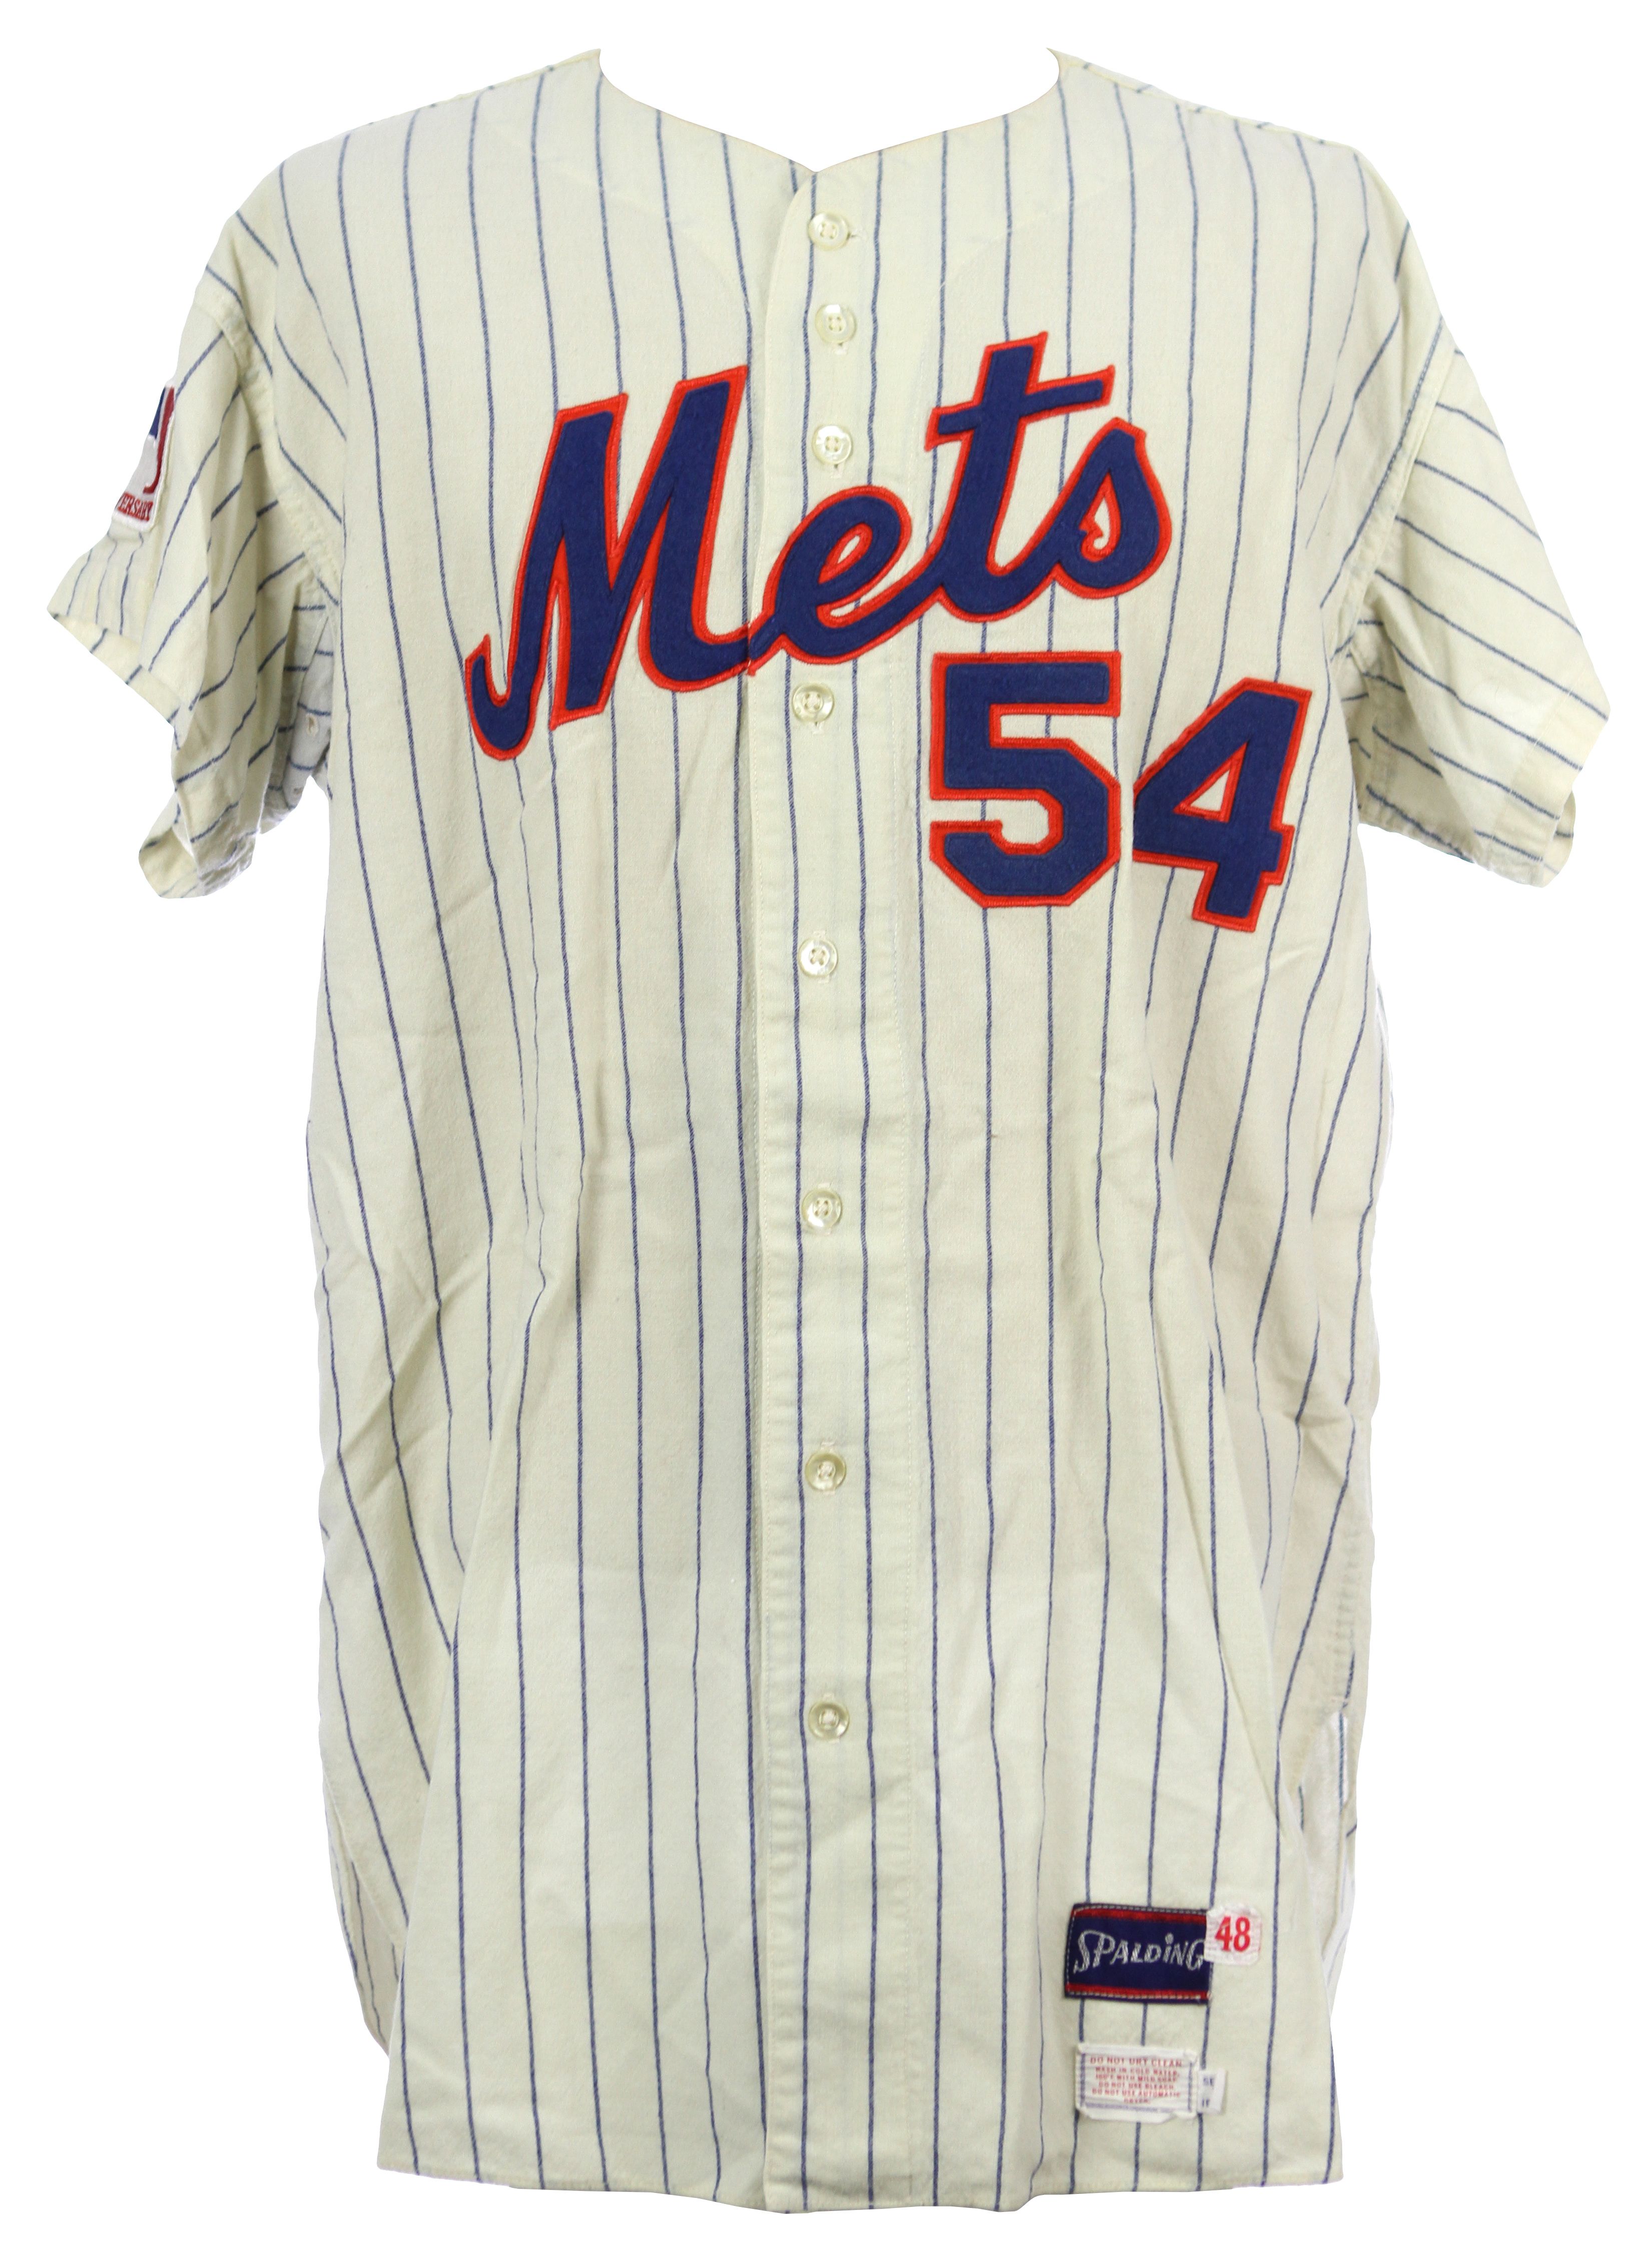 Rod Gaspar #17 - White Pinstripe Jersey - 50th Anniversary of the